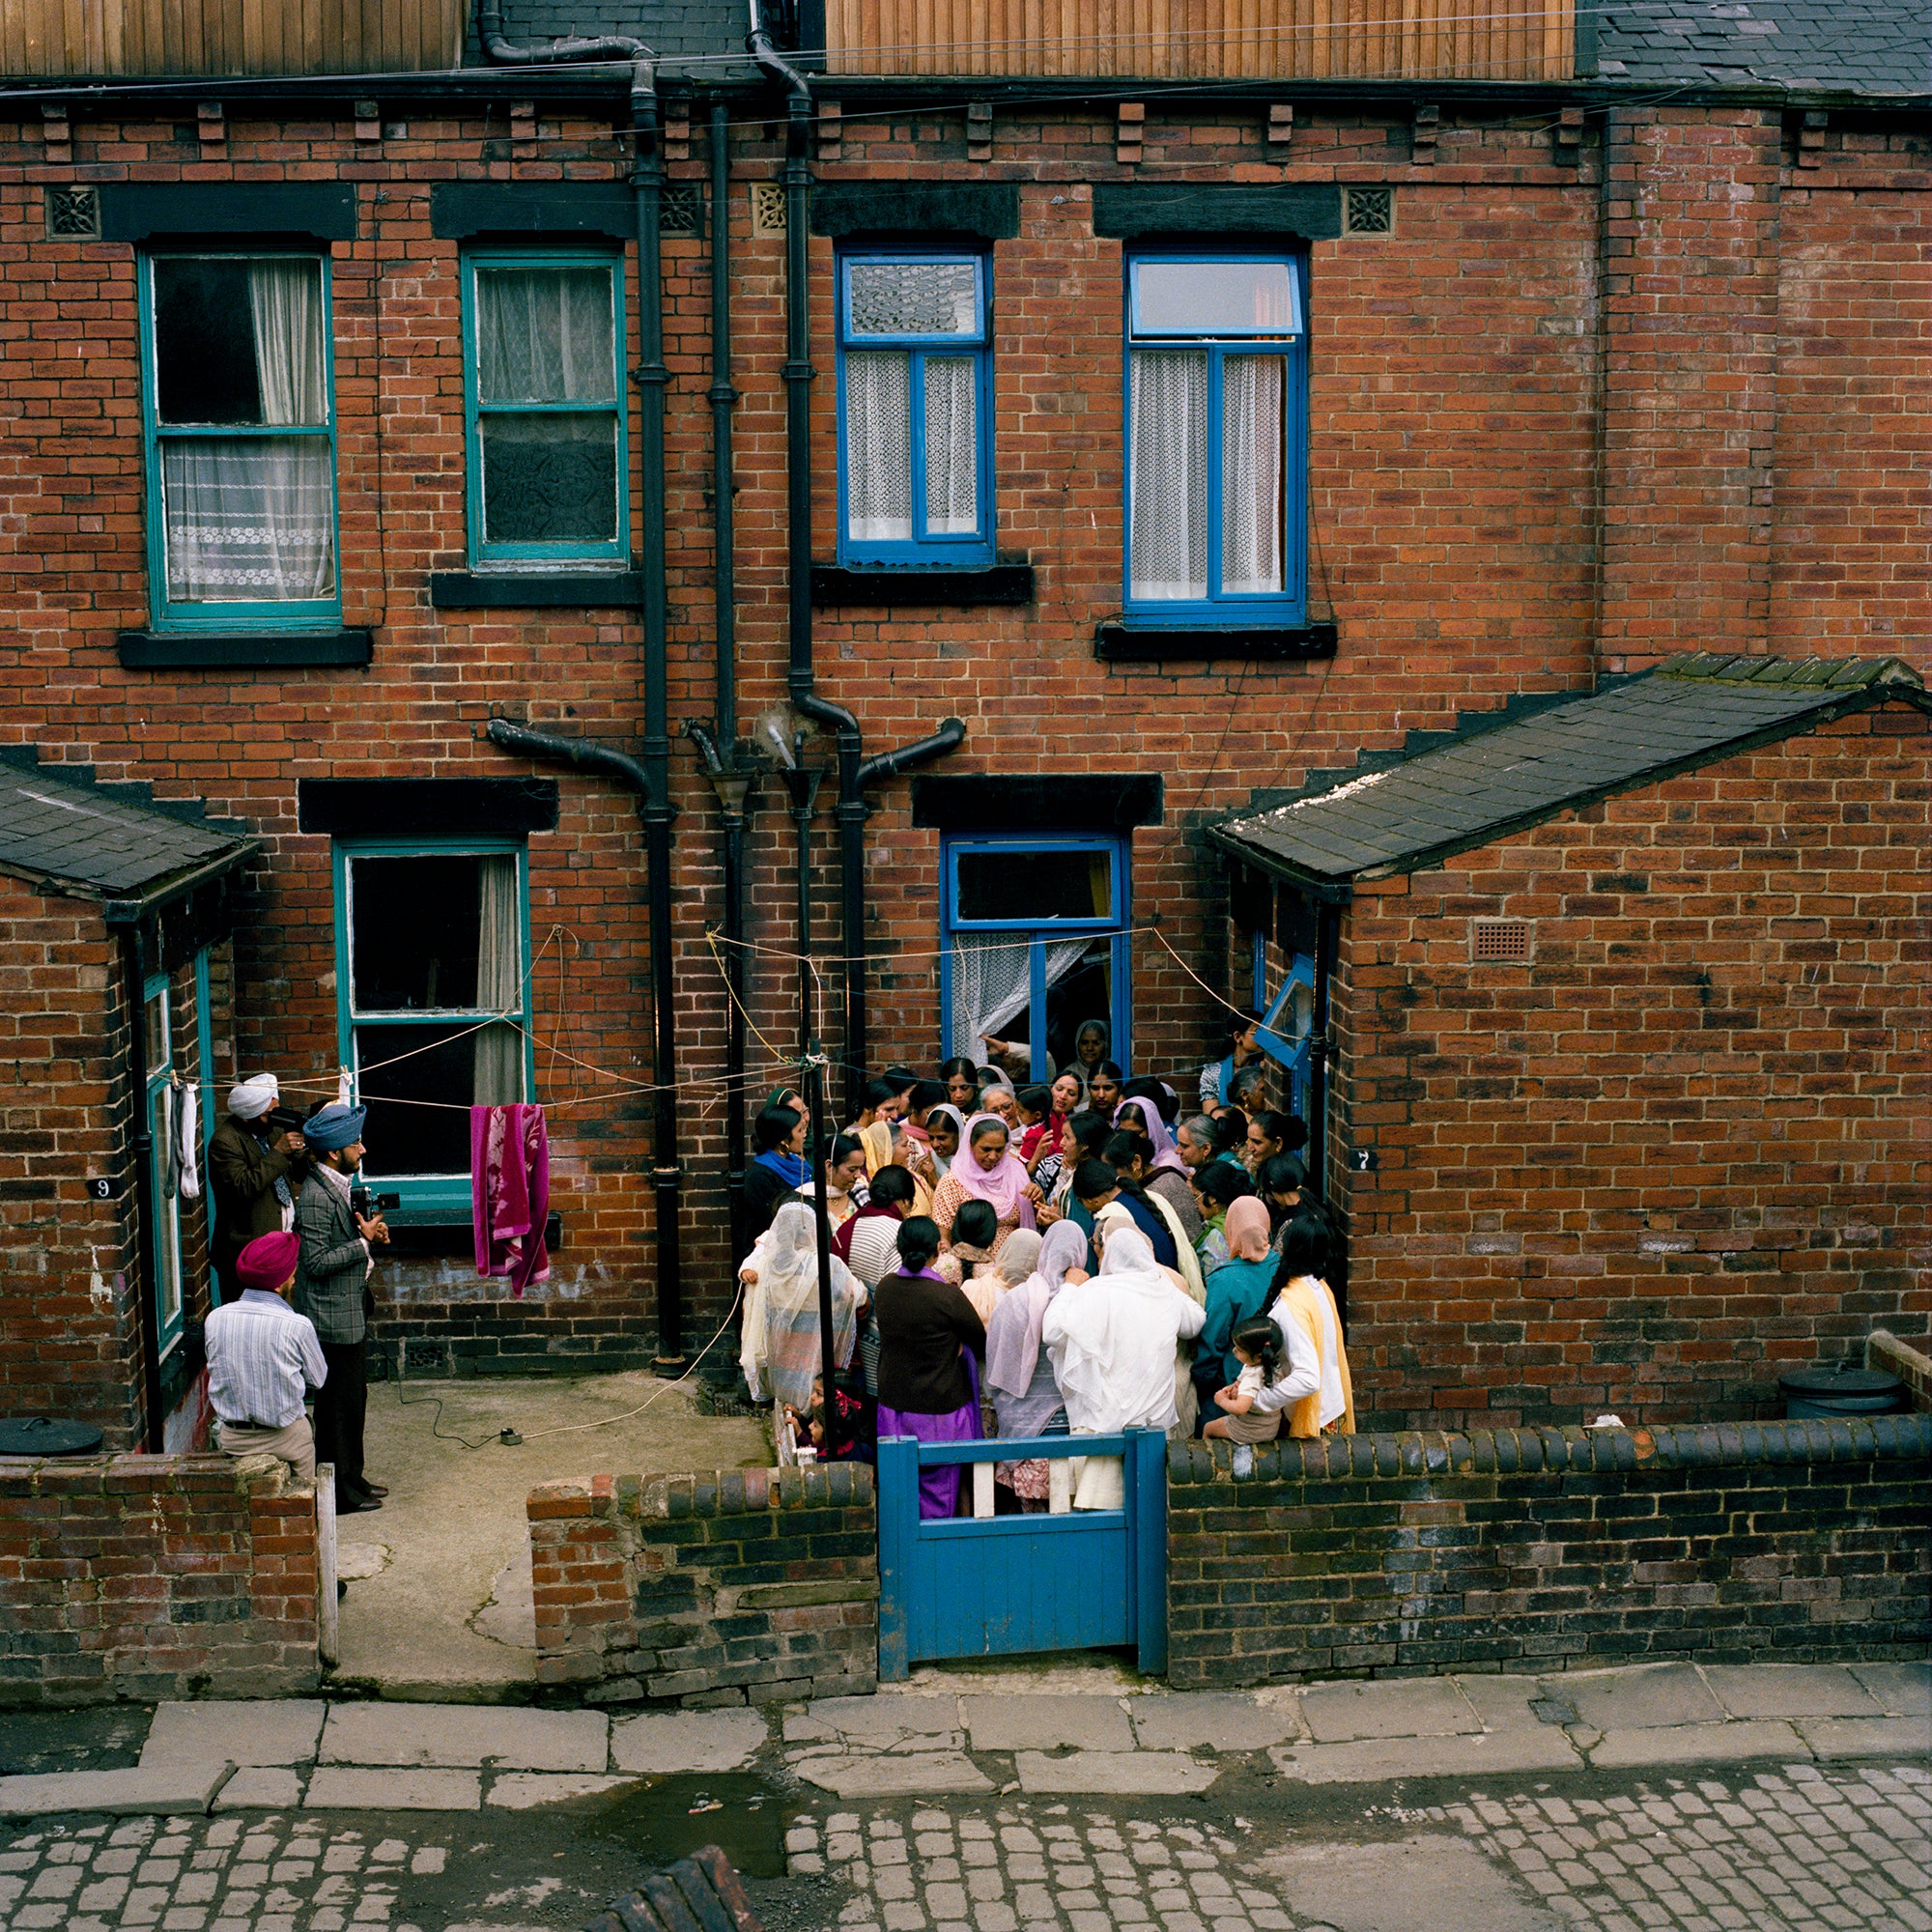 'How Many Aunties?', Back Hares Mount, Leeds, 1978 - 12x12" Pigment Print